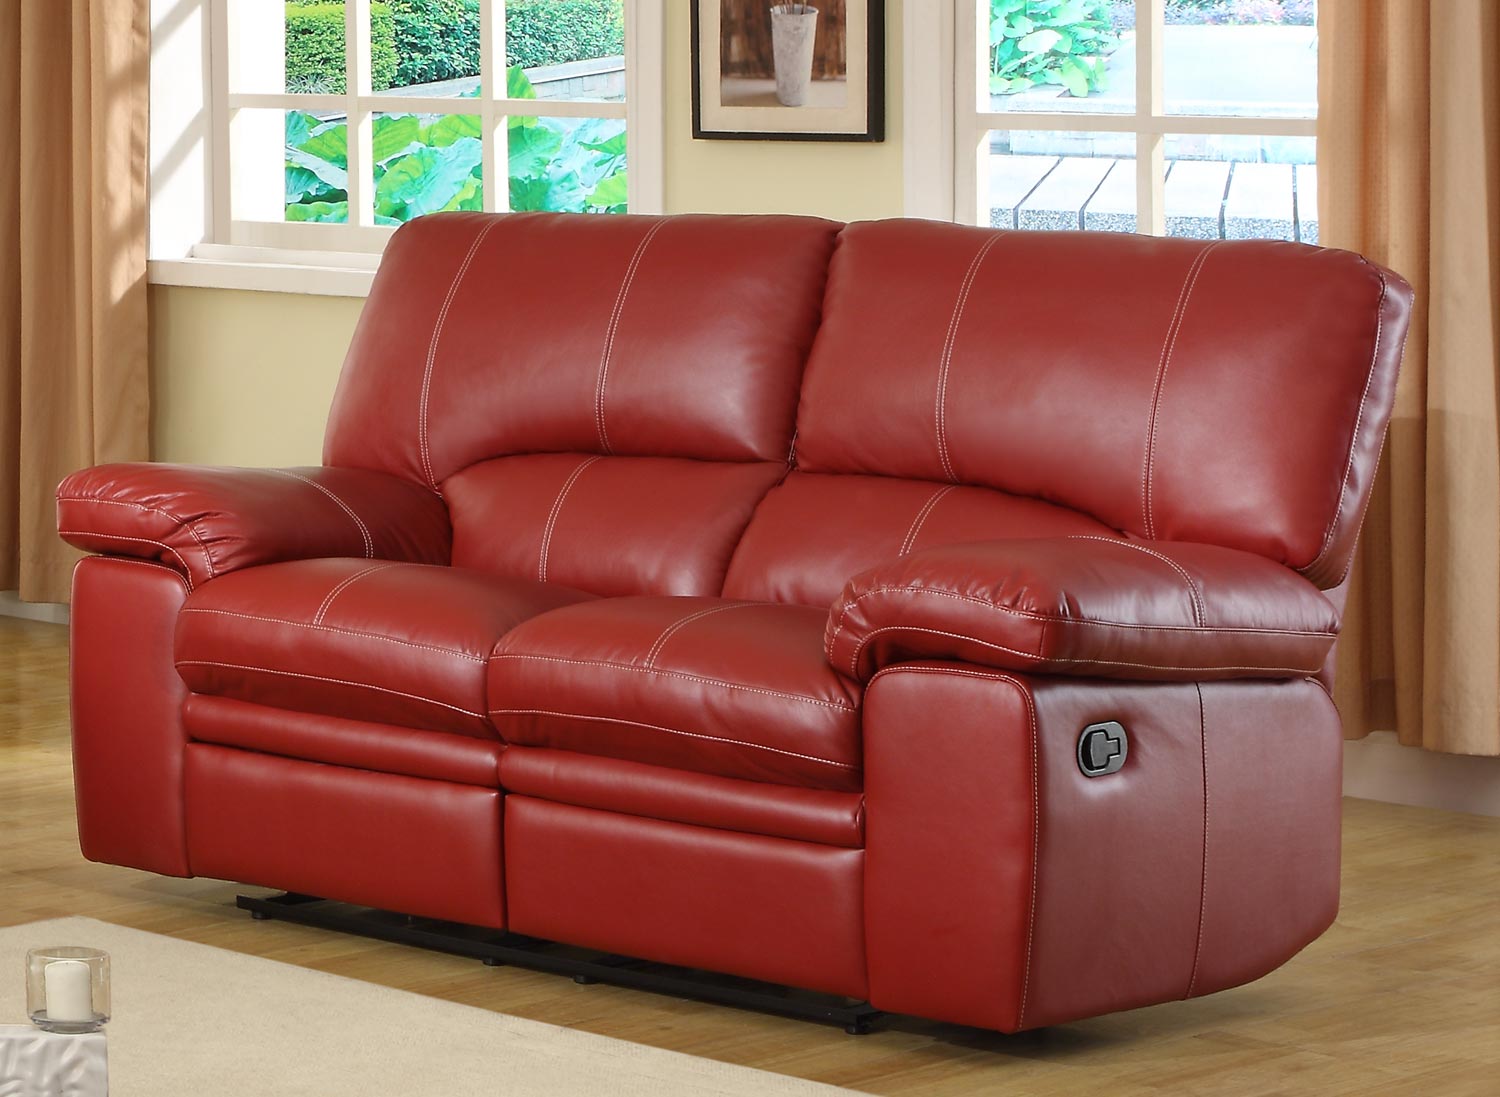 Homelegance Kendrick Double Recliner Love Seat - Red - Bonded Leather Match